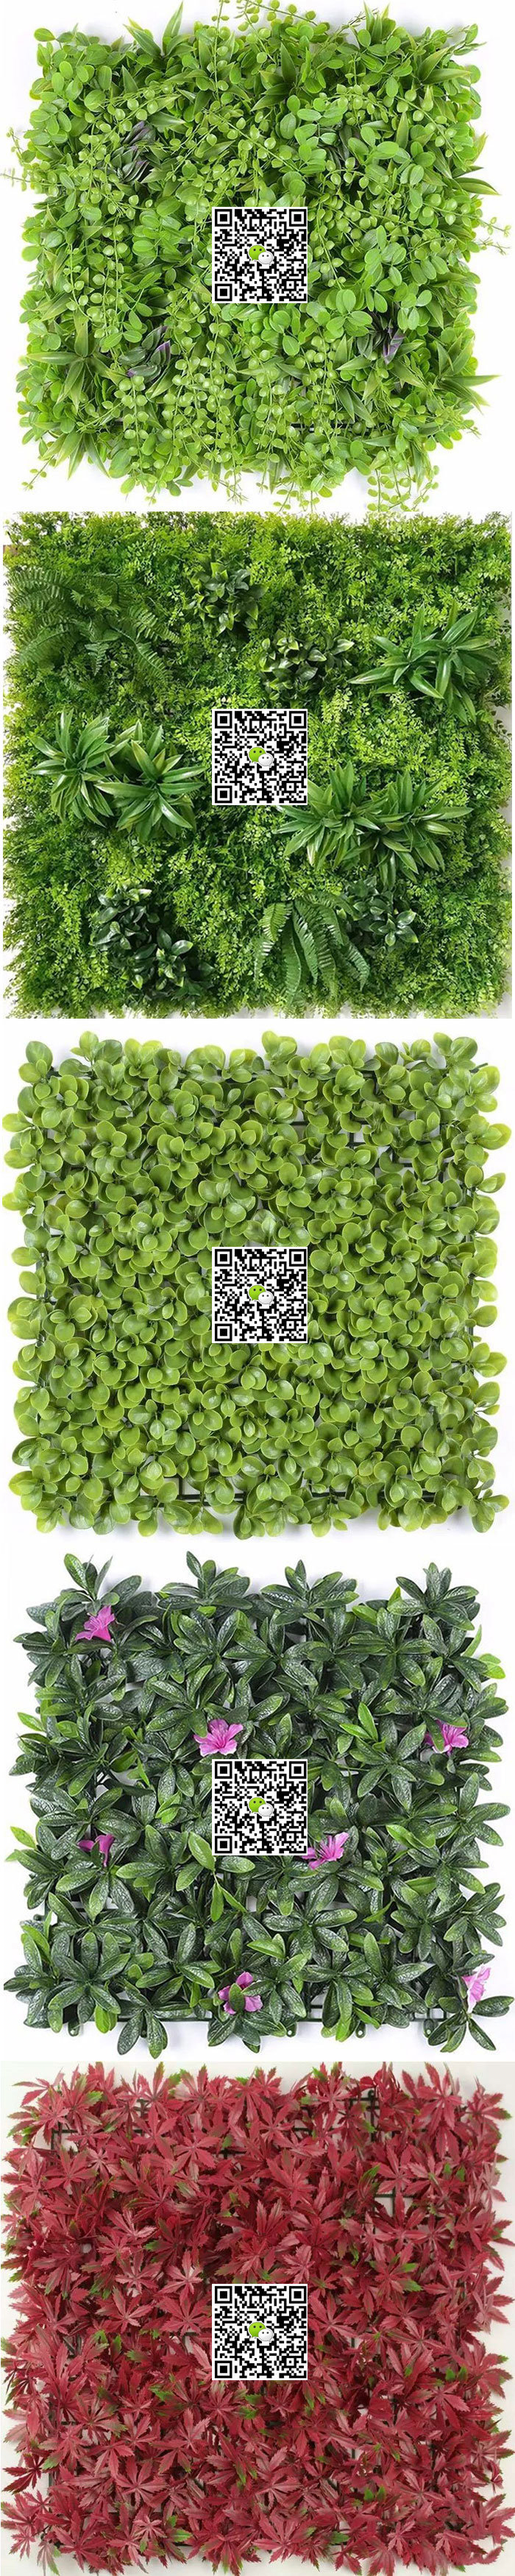 Plastic Artificial Green Plant Foliage Leaf Hedge Privacy Garden Fence Vertical Wall